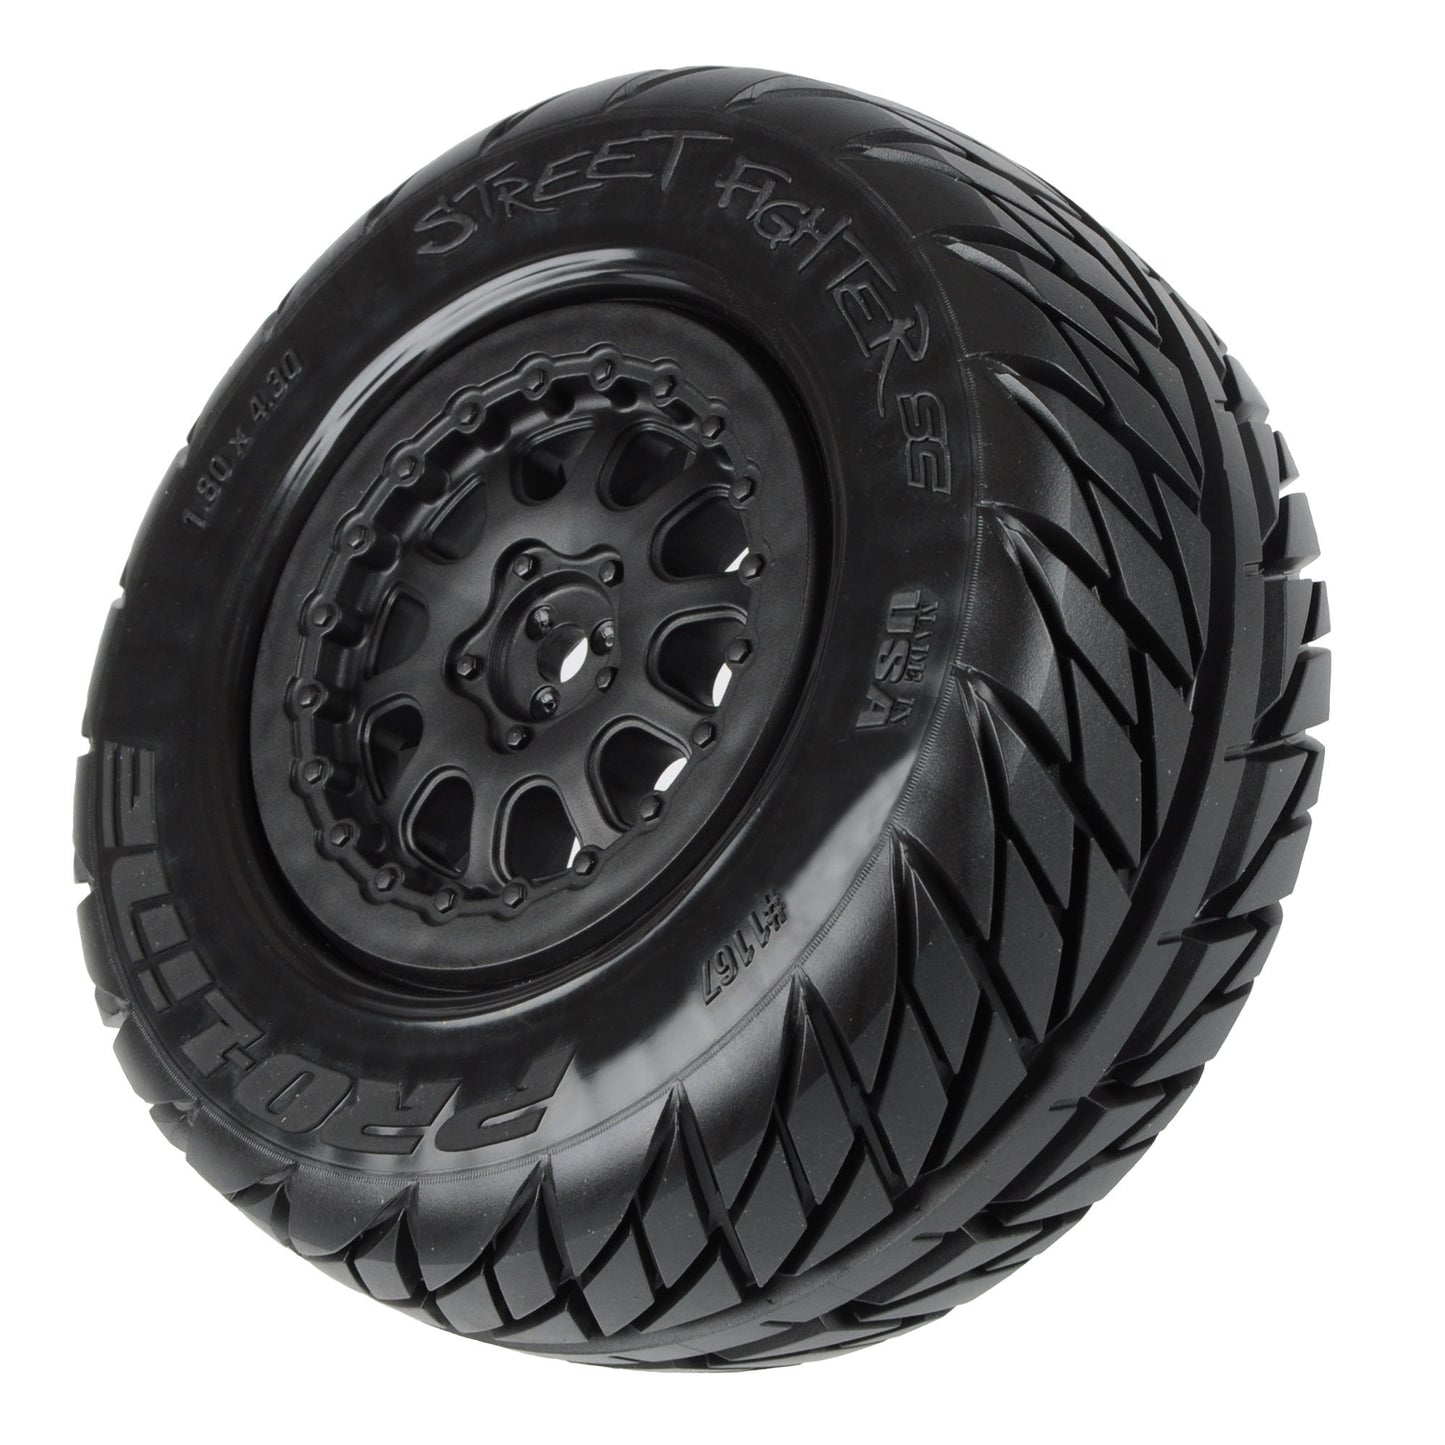 1/10 Pro-Line Street Fighter M2 Front/Rear 2.2"/3.0" Short Course Tires (2)